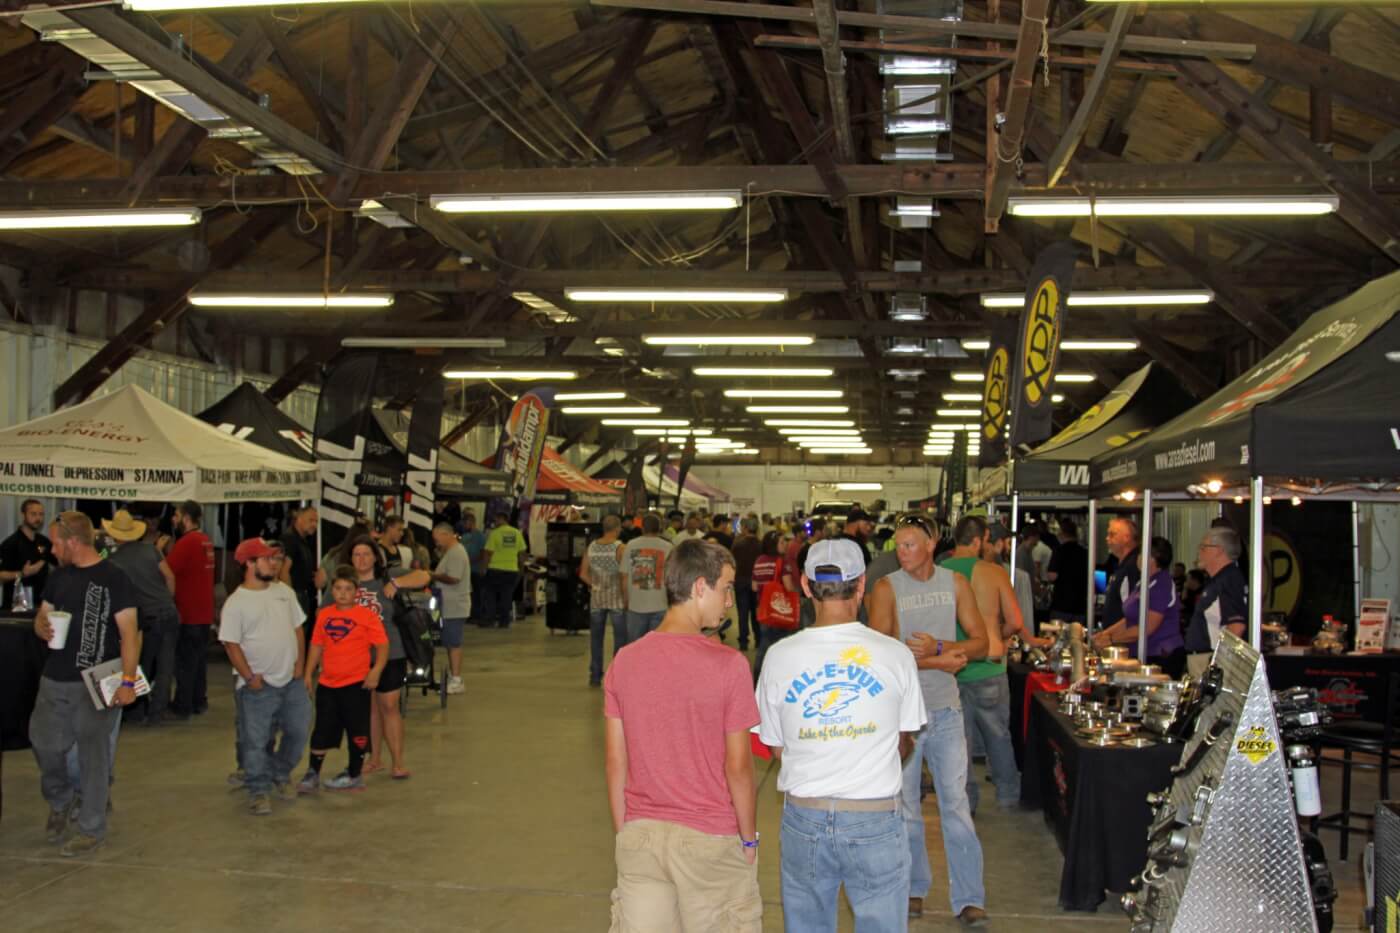 Vendor booths flank the sides of the indoor manufacturer’s midway, allowing spectators to check out the latest and greatest diesel performance products.